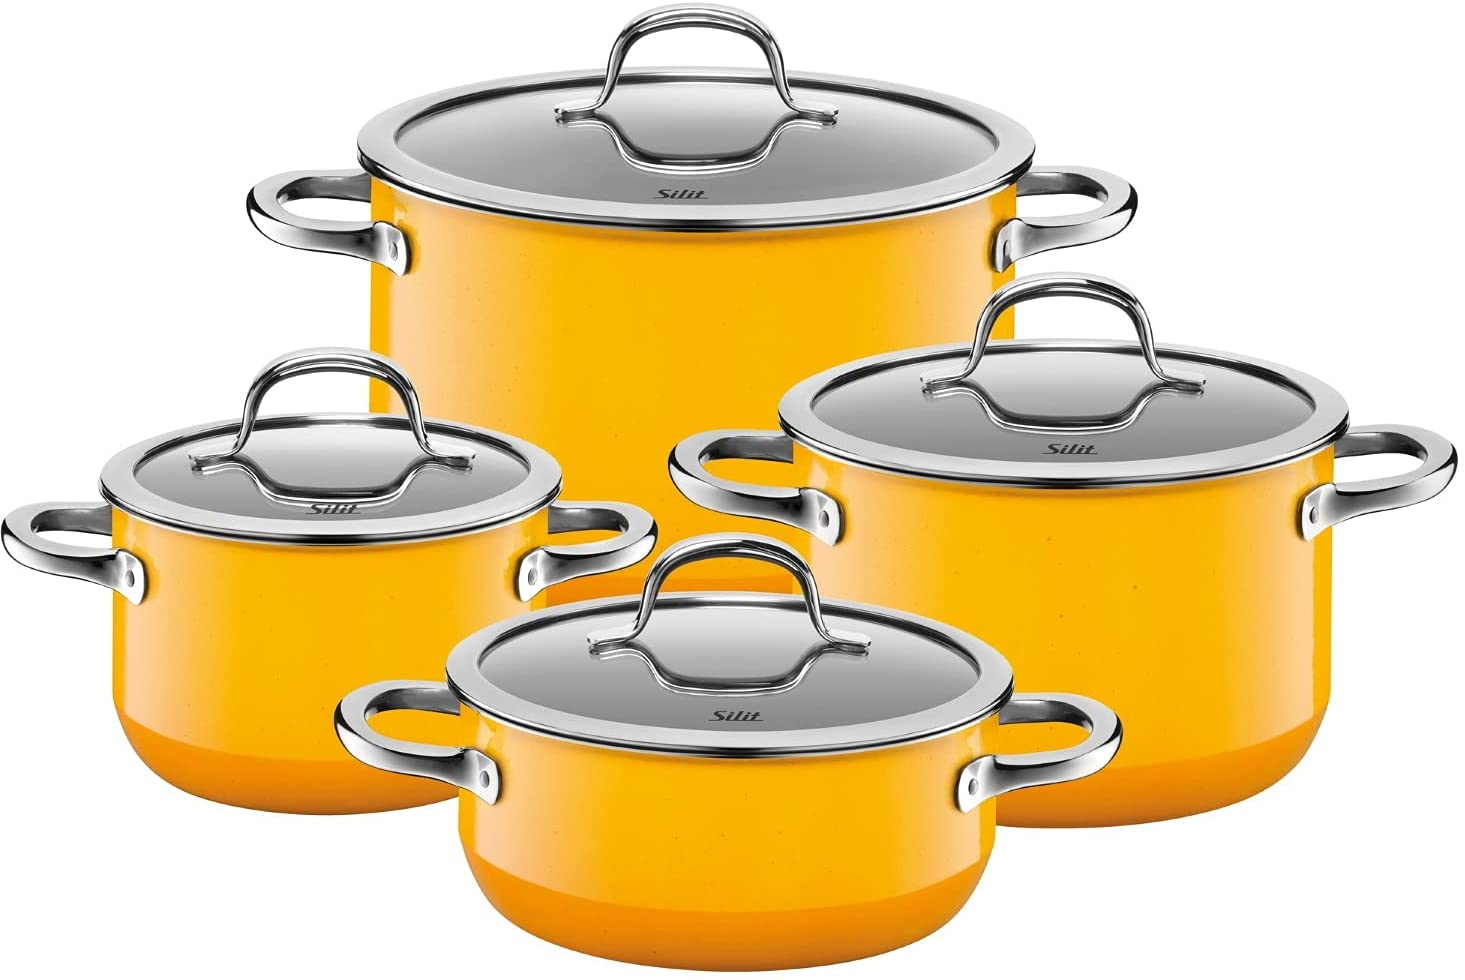 Silit Passion Yellow 4-Piece Saucepan Set with Glass Lid, Silargan Functional Ceramic, Induction Pots, Discontinued Model, Yellow